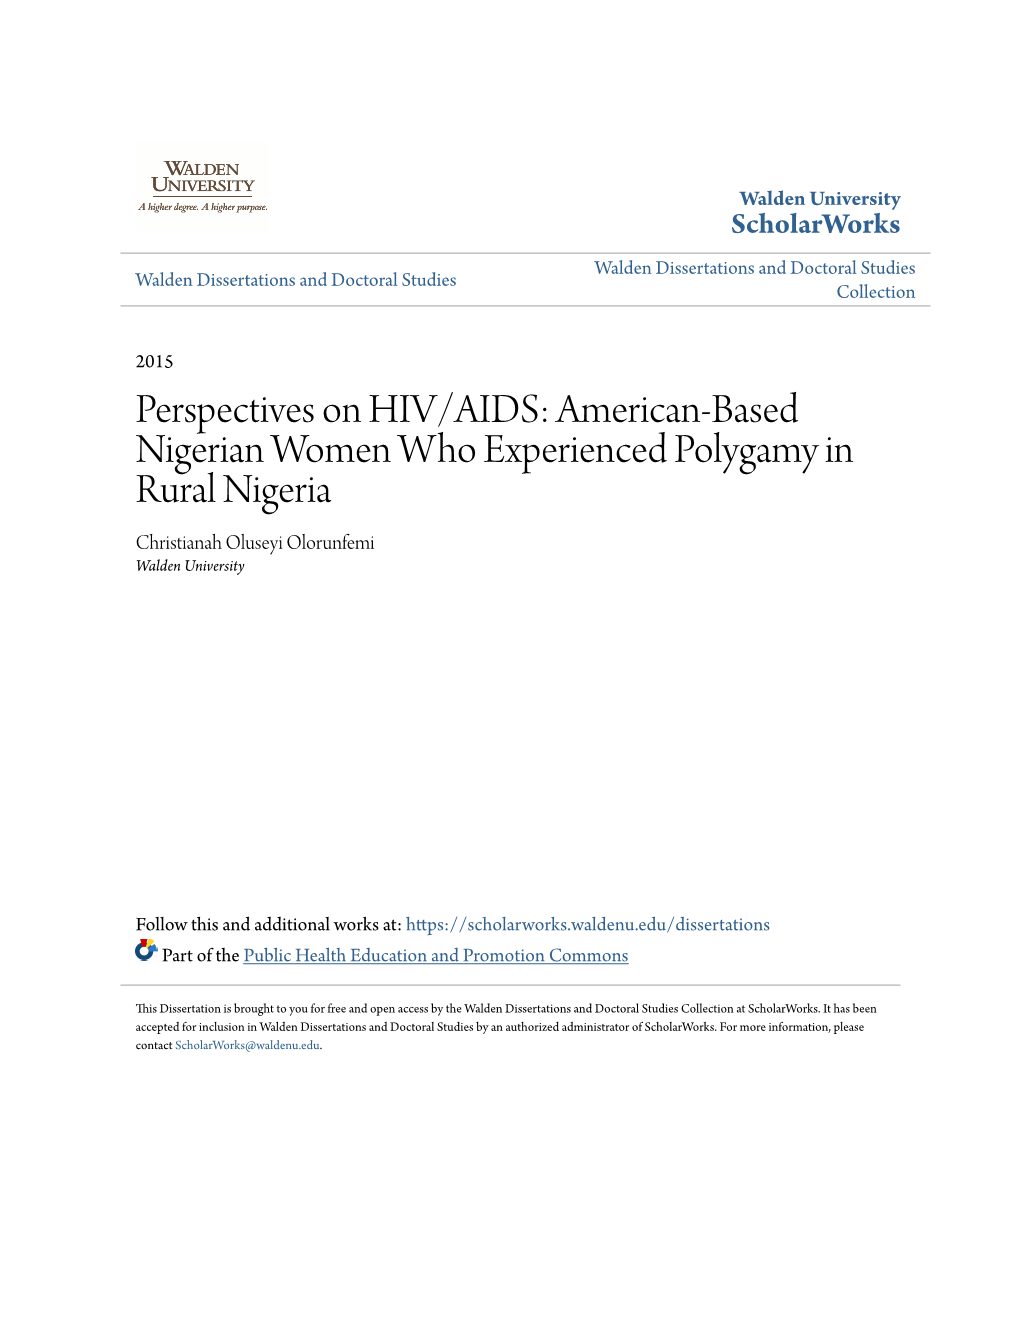 Perspectives on HIV/AIDS: American-Based Nigerian Women Who Experienced Polygamy in Rural Nigeria Christianah Oluseyi Olorunfemi Walden University